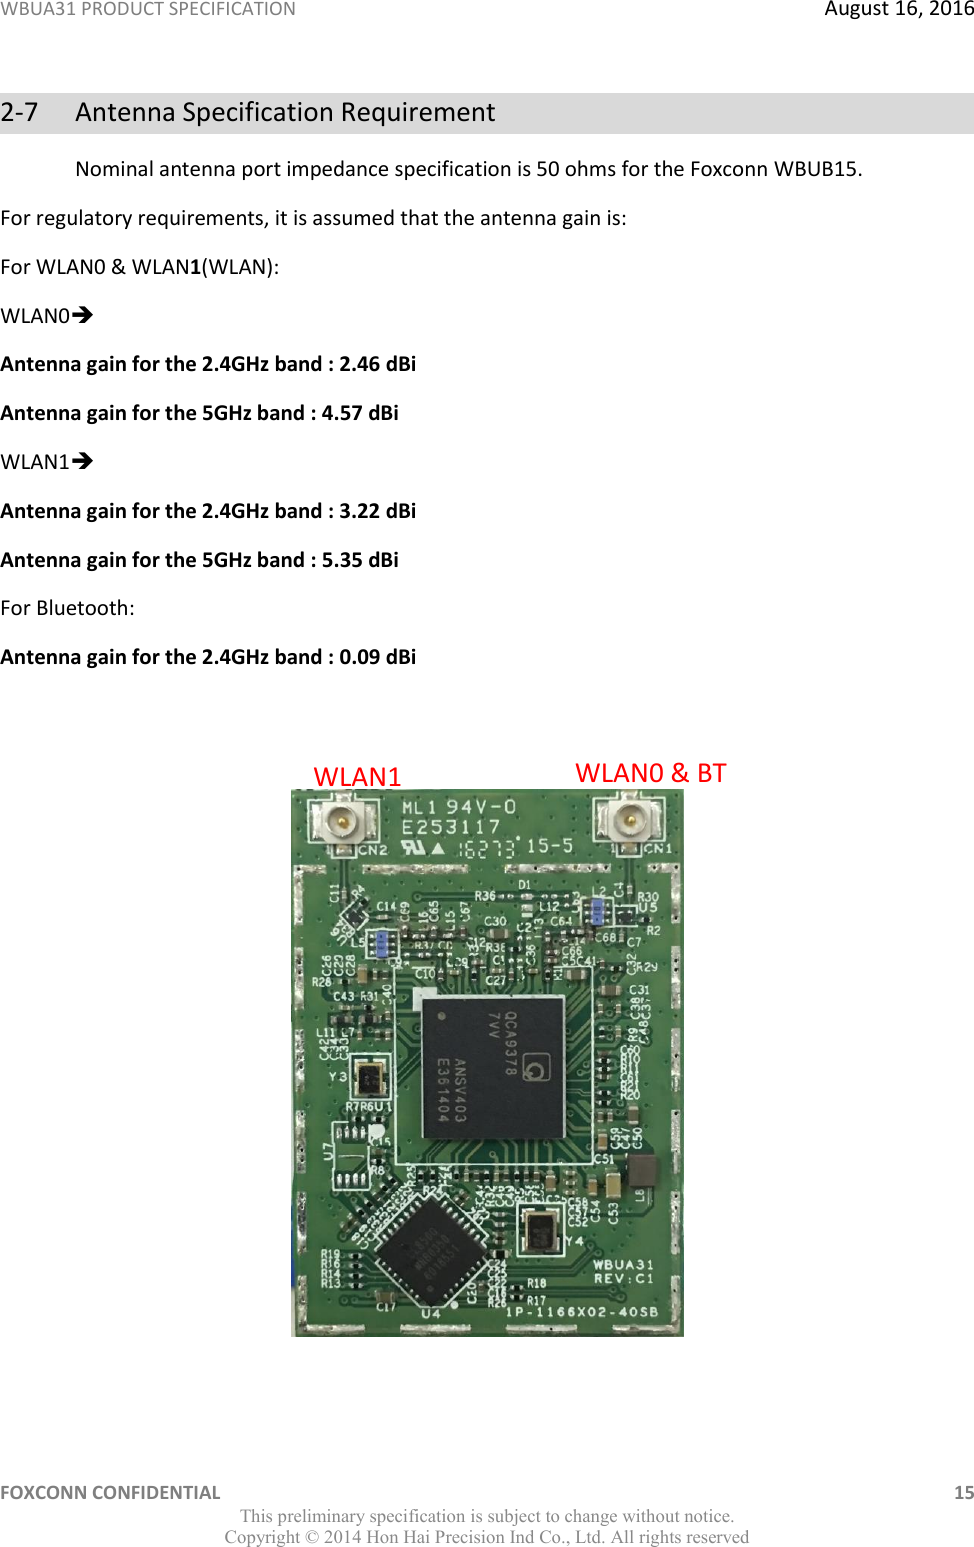 WBUA31 PRODUCT SPECIFICATION  August 16, 2016 FOXCONN CONFIDENTIAL    15 This preliminary specification is subject to change without notice. Copyright ©  2014 Hon Hai Precision Ind Co., Ltd. All rights reserved 2-7  Antenna Specification Requirement Nominal antenna port impedance specification is 50 ohms for the Foxconn WBUB15. For regulatory requirements, it is assumed that the antenna gain is: For WLAN0 &amp; WLAN1(WLAN): WLAN0 Antenna gain for the 2.4GHz band : 2.46 dBi Antenna gain for the 5GHz band : 4.57 dBi WLAN1 Antenna gain for the 2.4GHz band : 3.22 dBi Antenna gain for the 5GHz band : 5.35 dBi For Bluetooth:  Antenna gain for the 2.4GHz band : 0.09 dBi     WLAN1 WLAN0 &amp; BT 